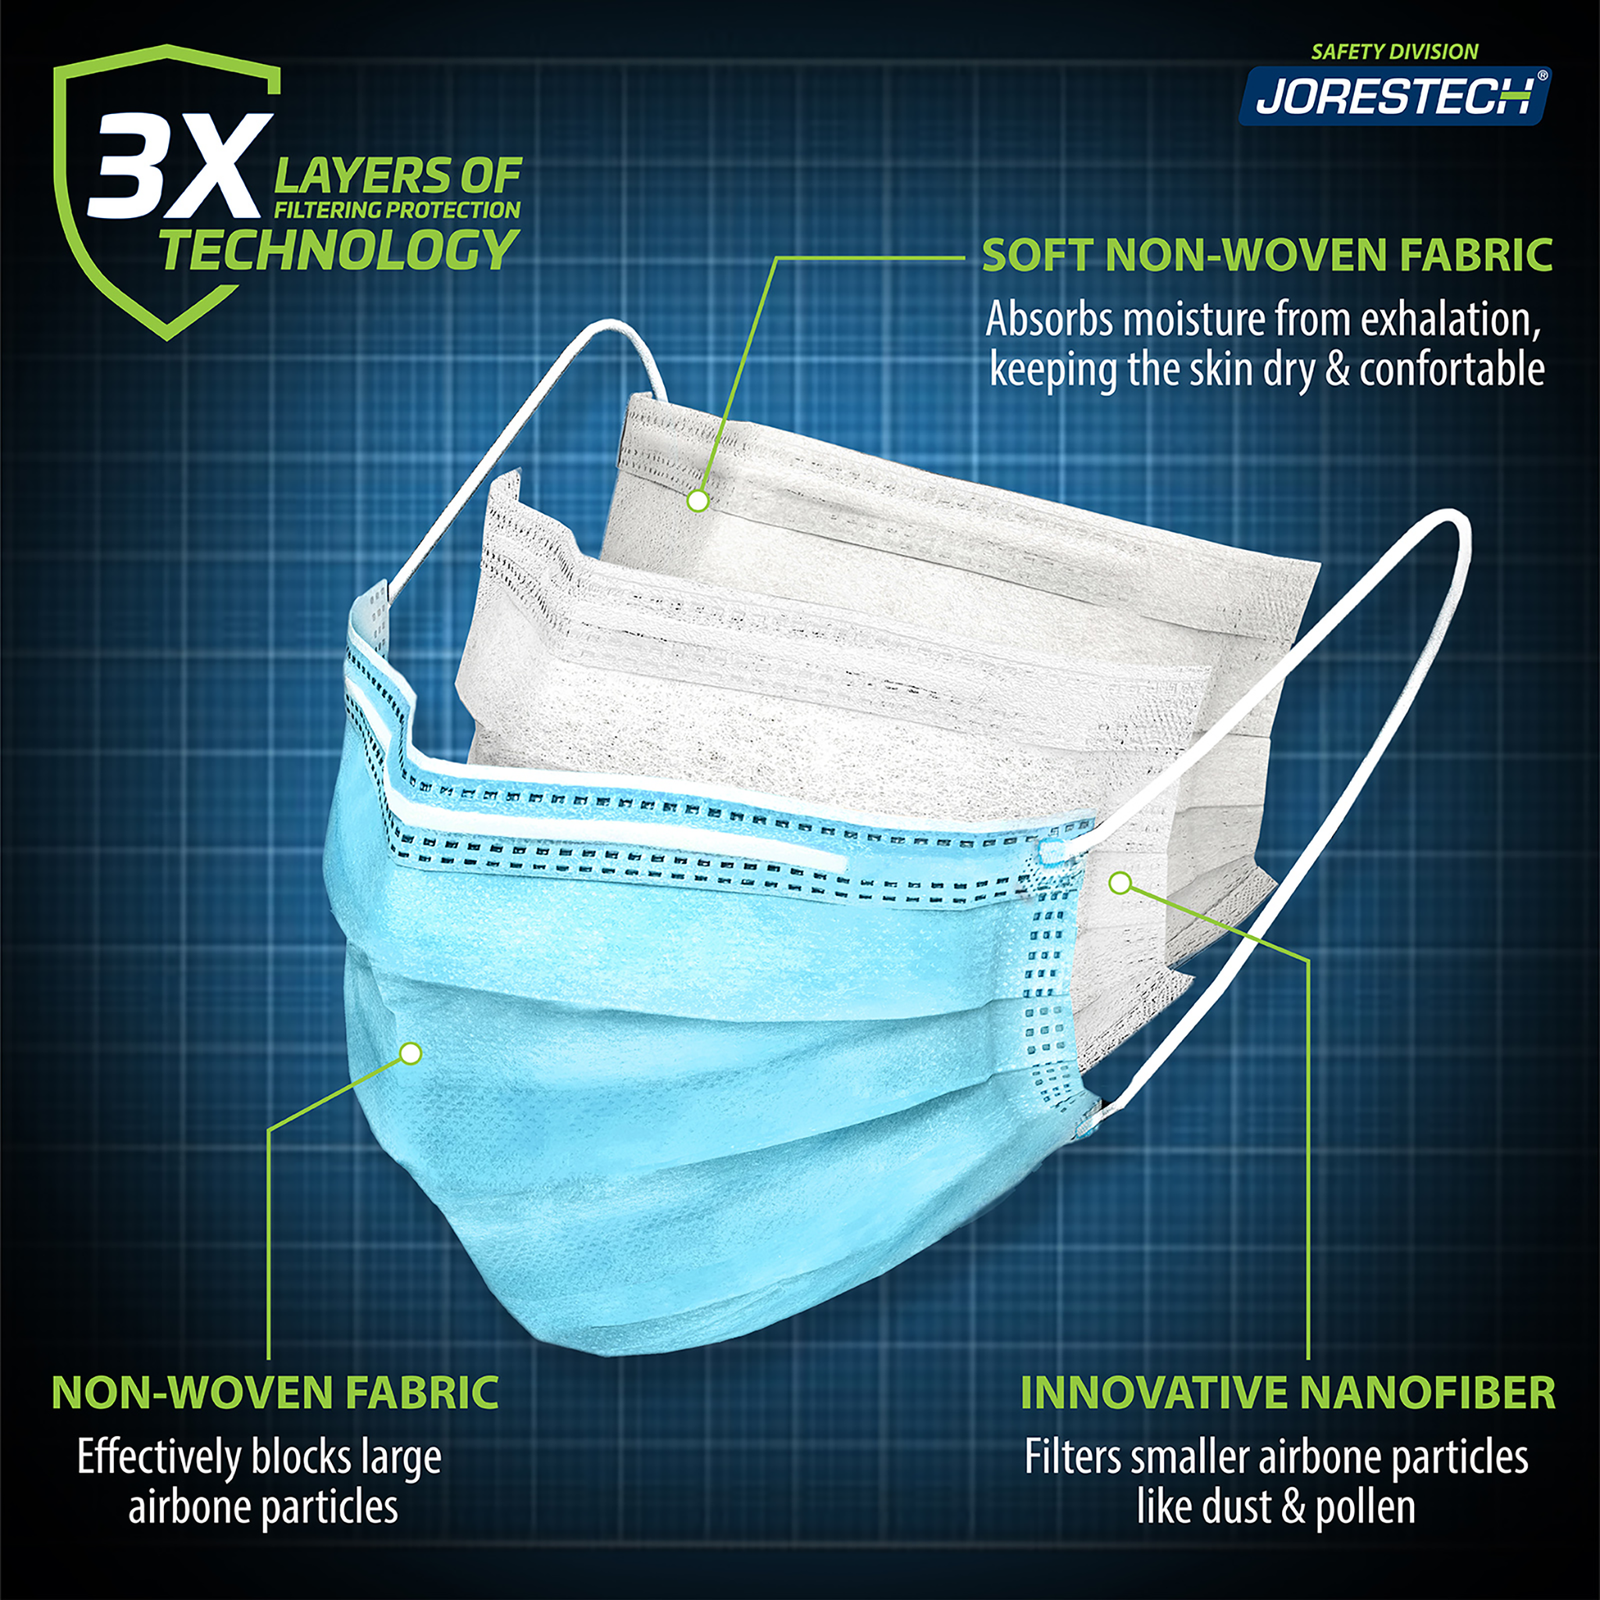 Features a blue 3 ply face mask on a banner with text that reads: Soft non woven fabric absorbs moisture from exhalation, keeps the skin dry and comfortable. Also blocks large airborne particles. Innovative nanofiber filters smaller airborne particles like dust & polen. 3 layers of filtering protection